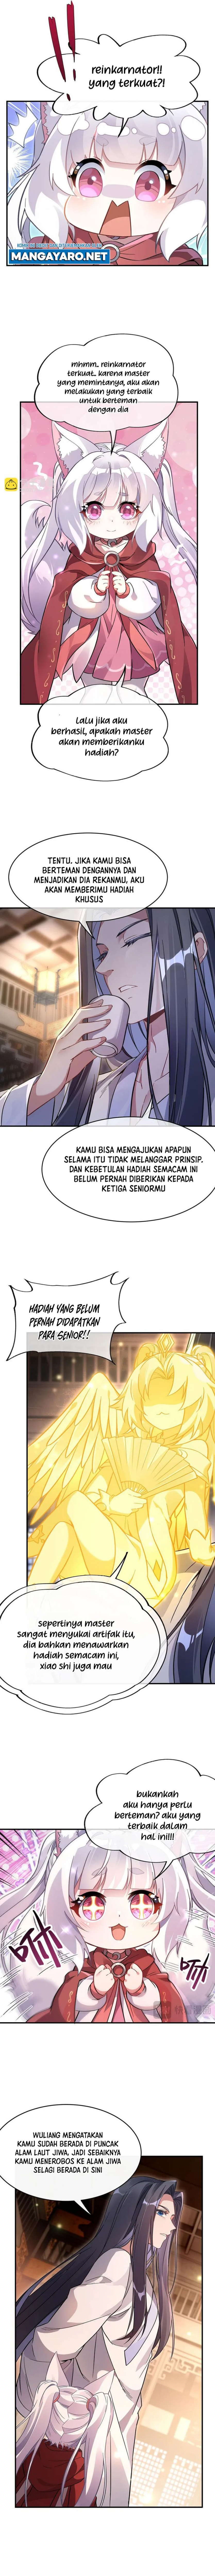 Dilarang COPAS - situs resmi www.mangacanblog.com - Komik my female apprentices are all big shots from the future 211 - chapter 211 212 Indonesia my female apprentices are all big shots from the future 211 - chapter 211 Terbaru 4|Baca Manga Komik Indonesia|Mangacan